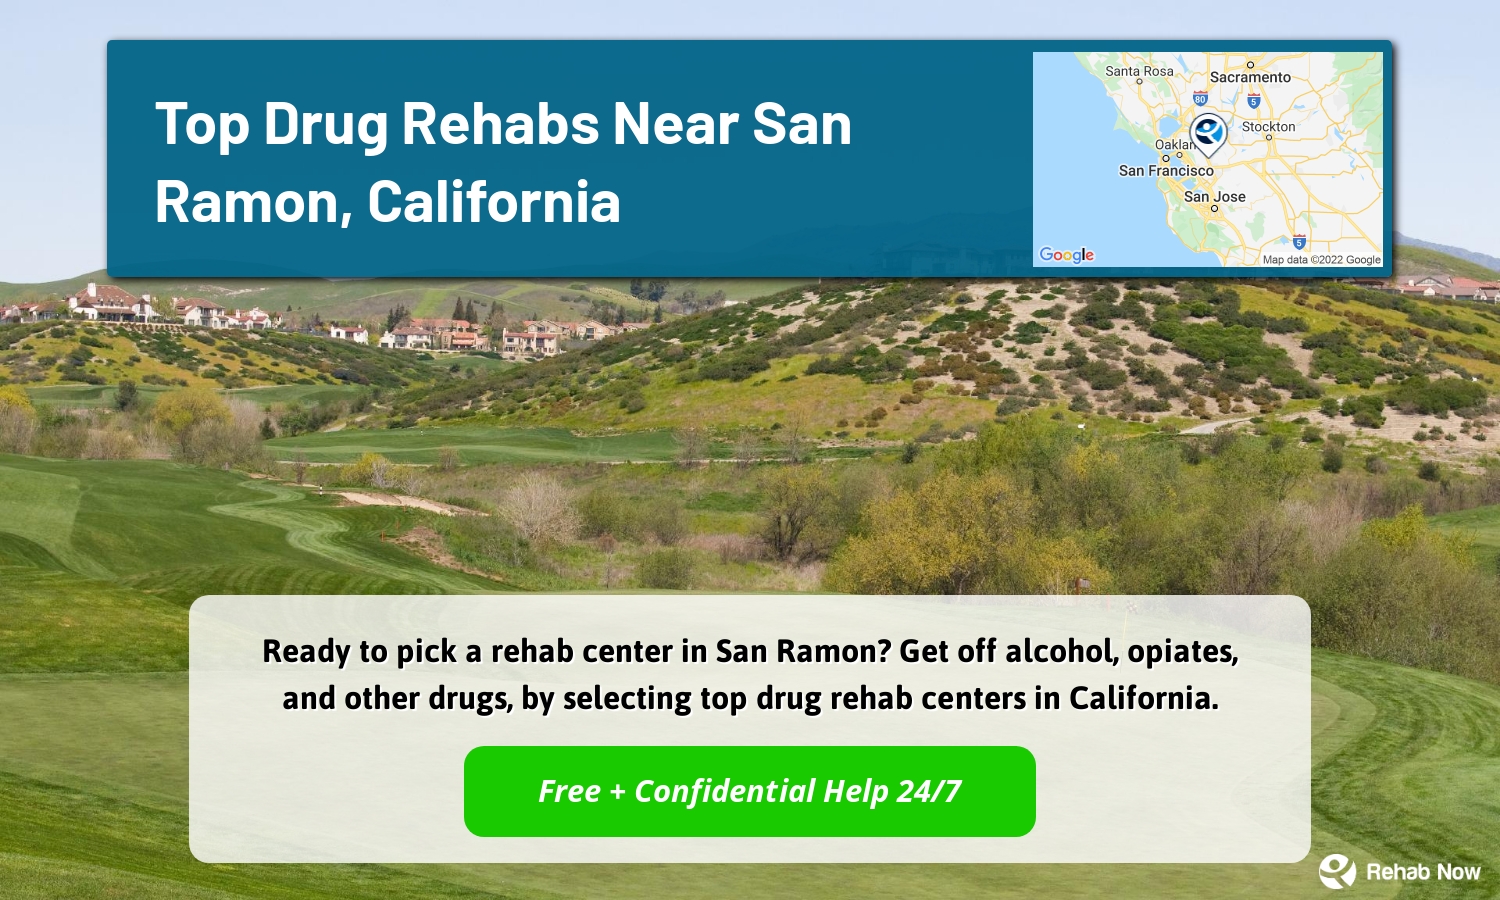 Ready to pick a rehab center in San Ramon? Get off alcohol, opiates, and other drugs, by selecting top drug rehab centers in California.